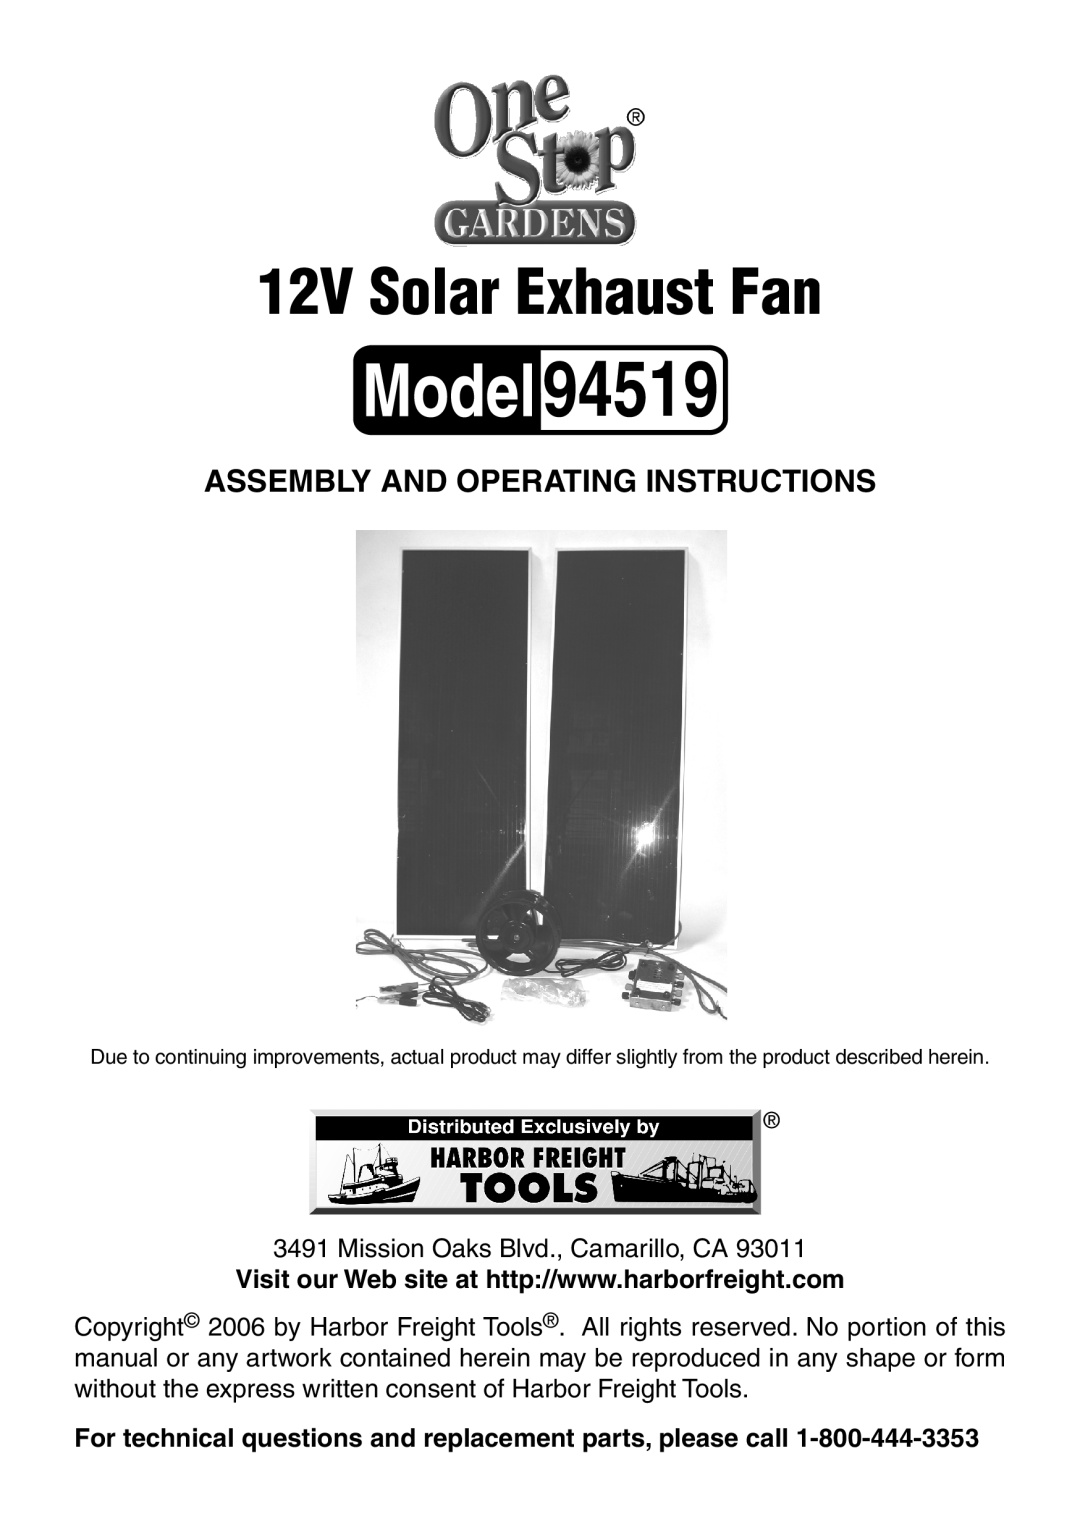 Harbor Freight Tools 94519 manual Assembly And Operating Instructions, 12V Solar Exhaust Fan 